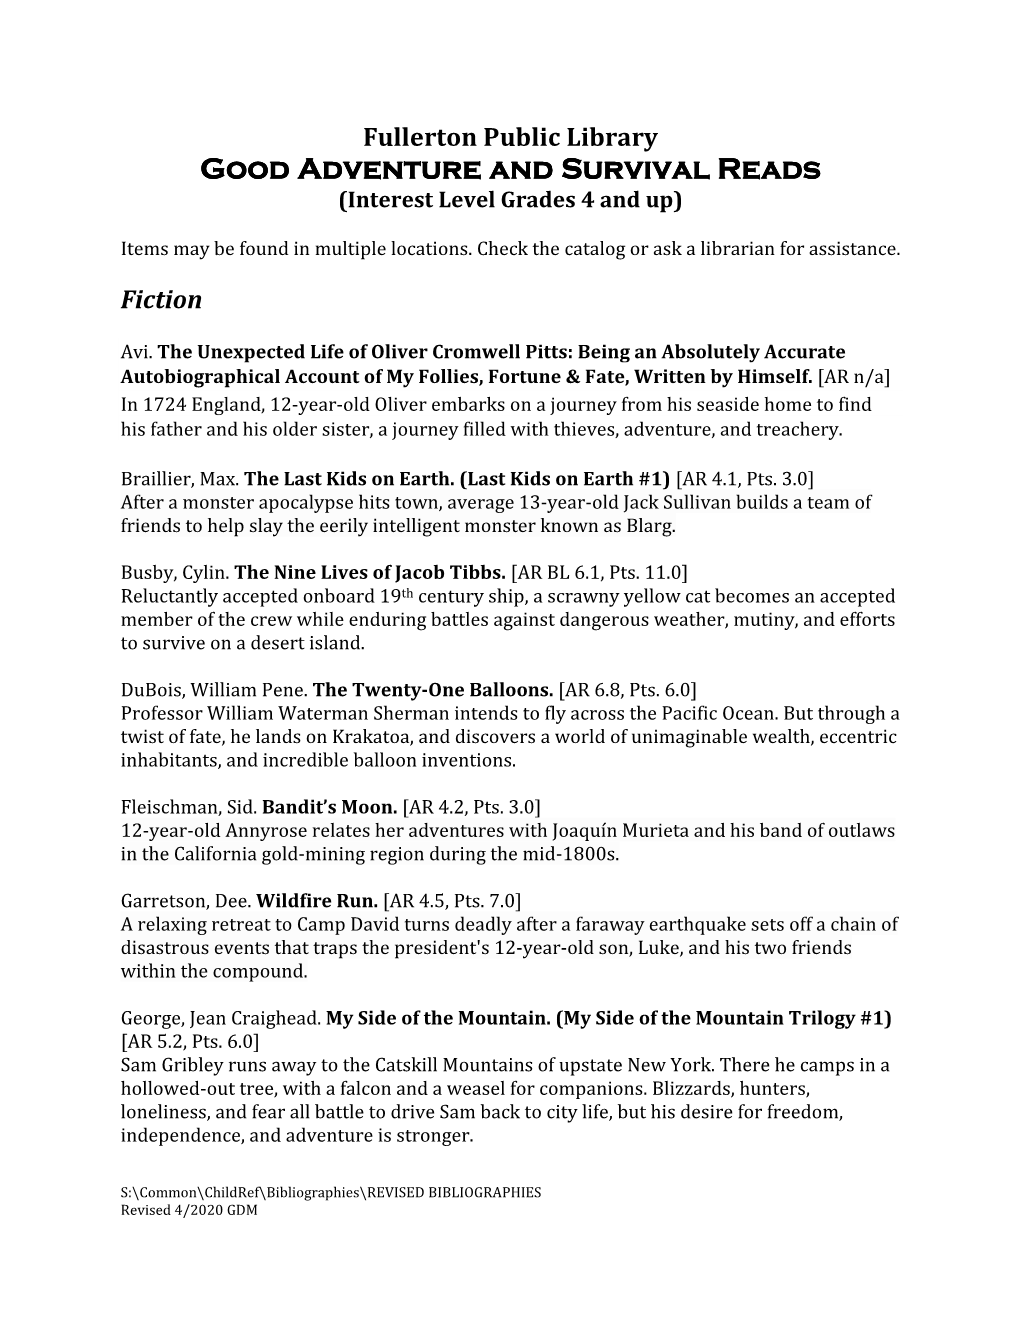 Good Adventure and Survival Reads Good Adventure